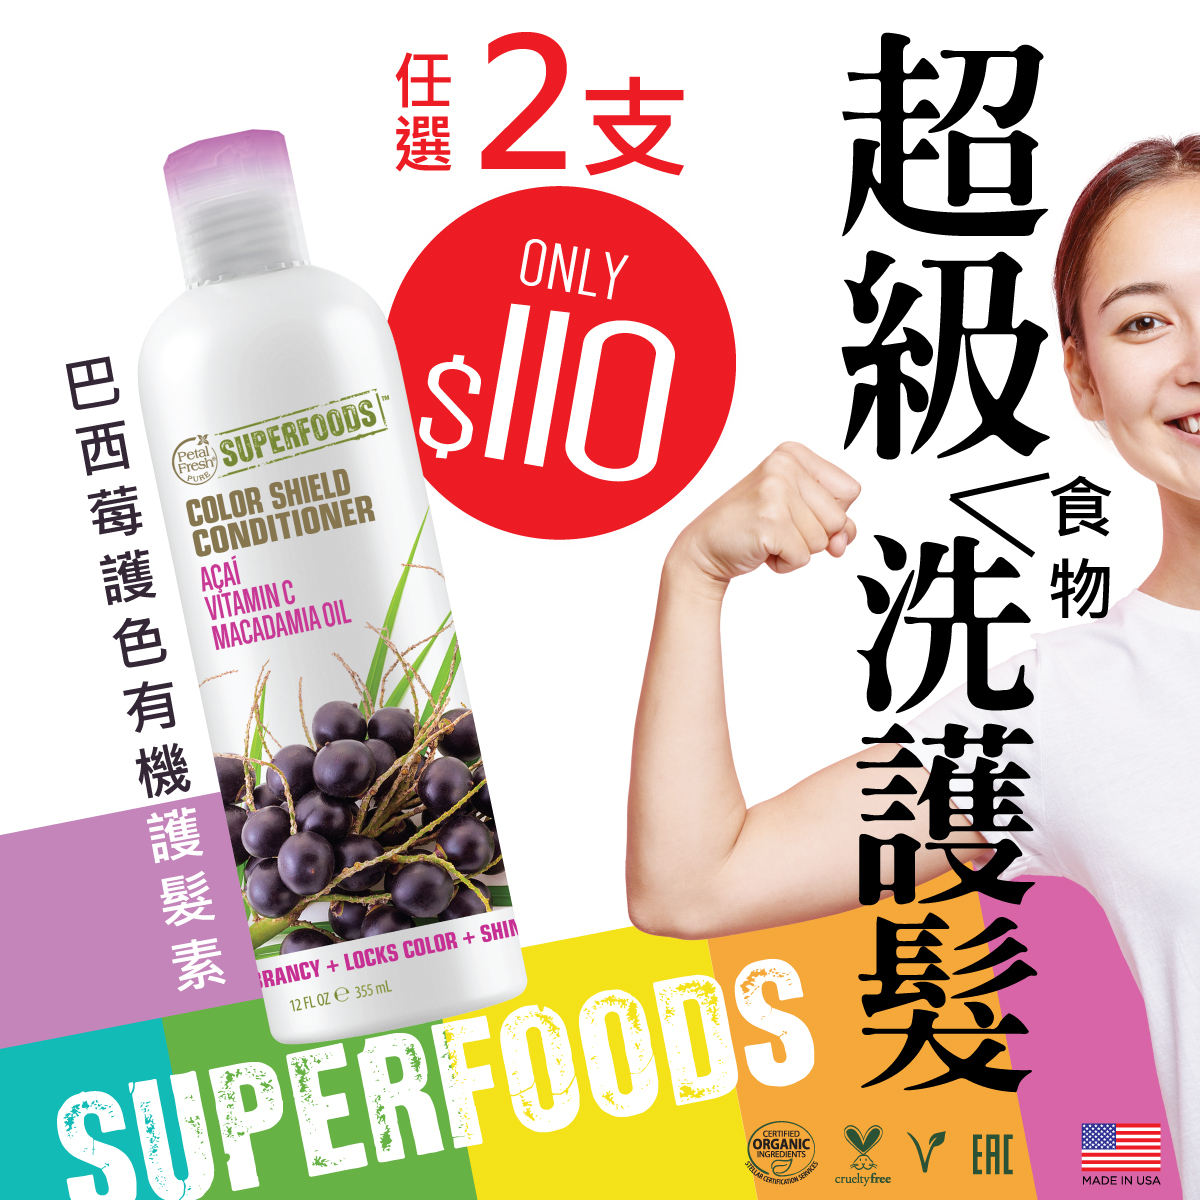 Superfoods Acai Color Shield Conditioner